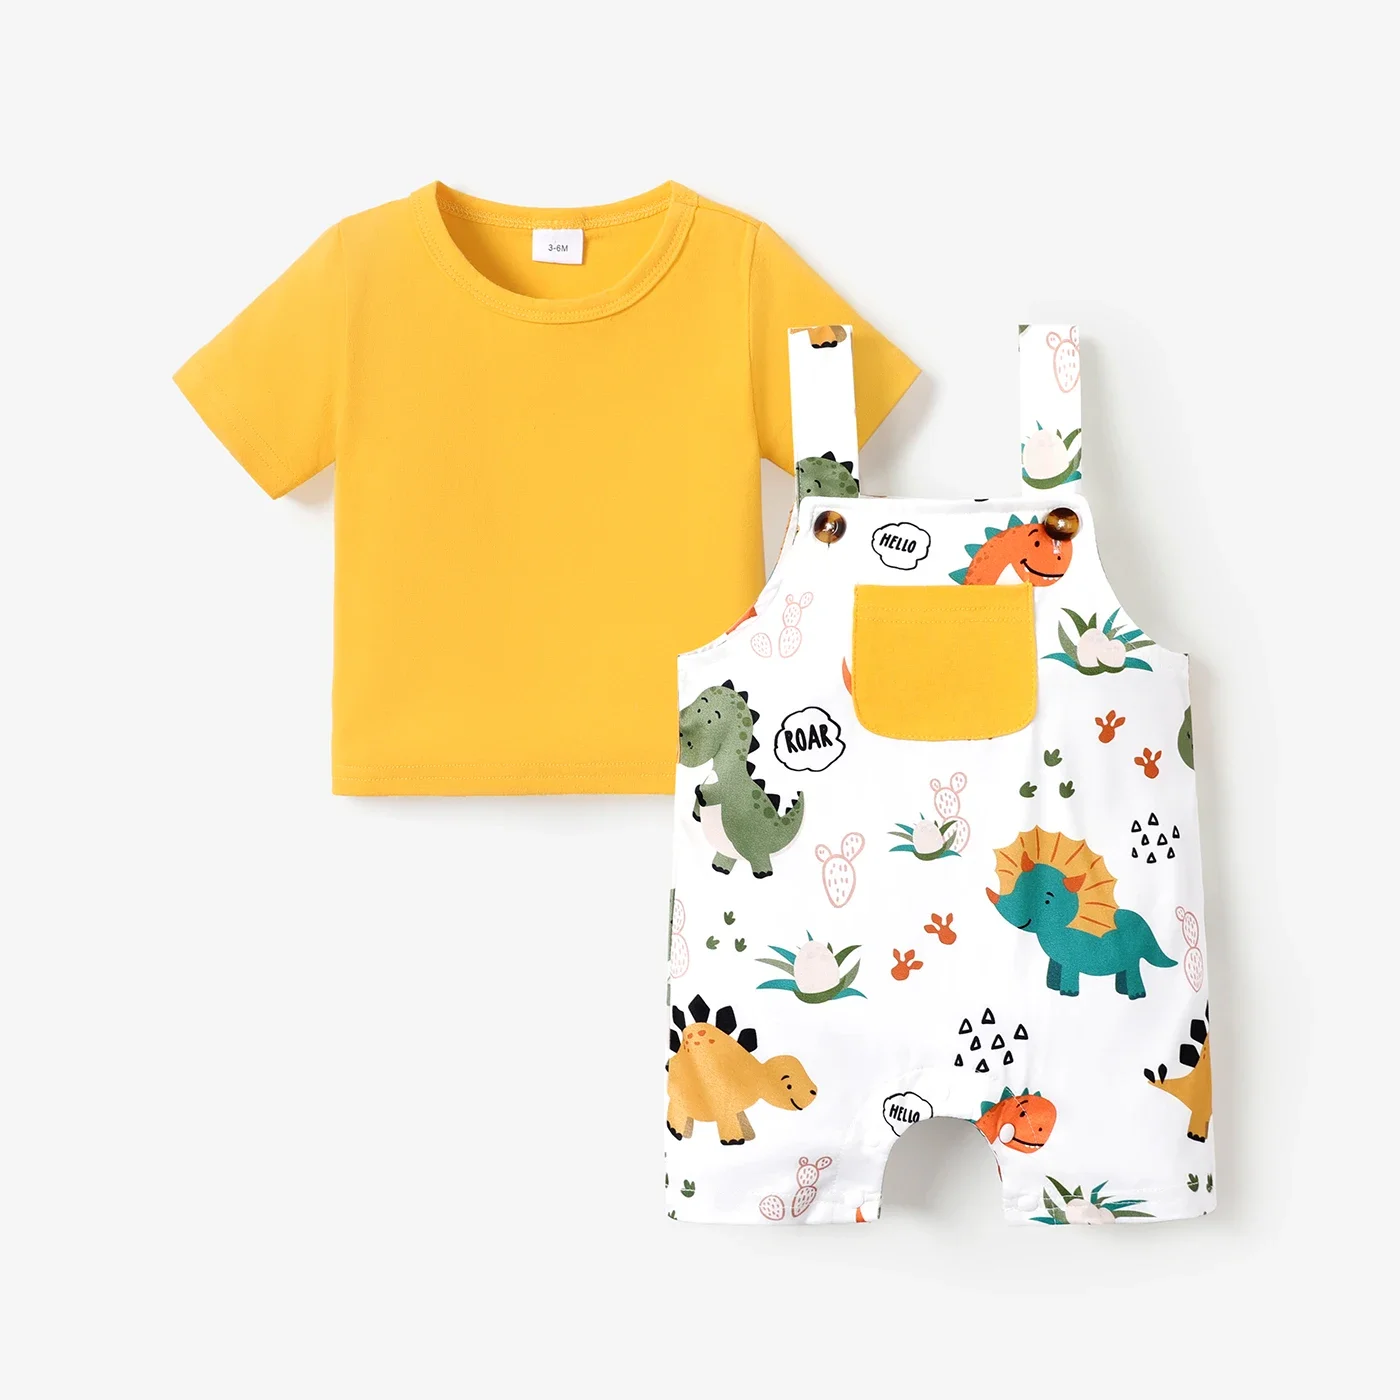 PatPat 2pcs Baby Boy Short-sleeve Solid Tee and Allover Dinosaur Print Overall Romper Set Soft and Comfortable